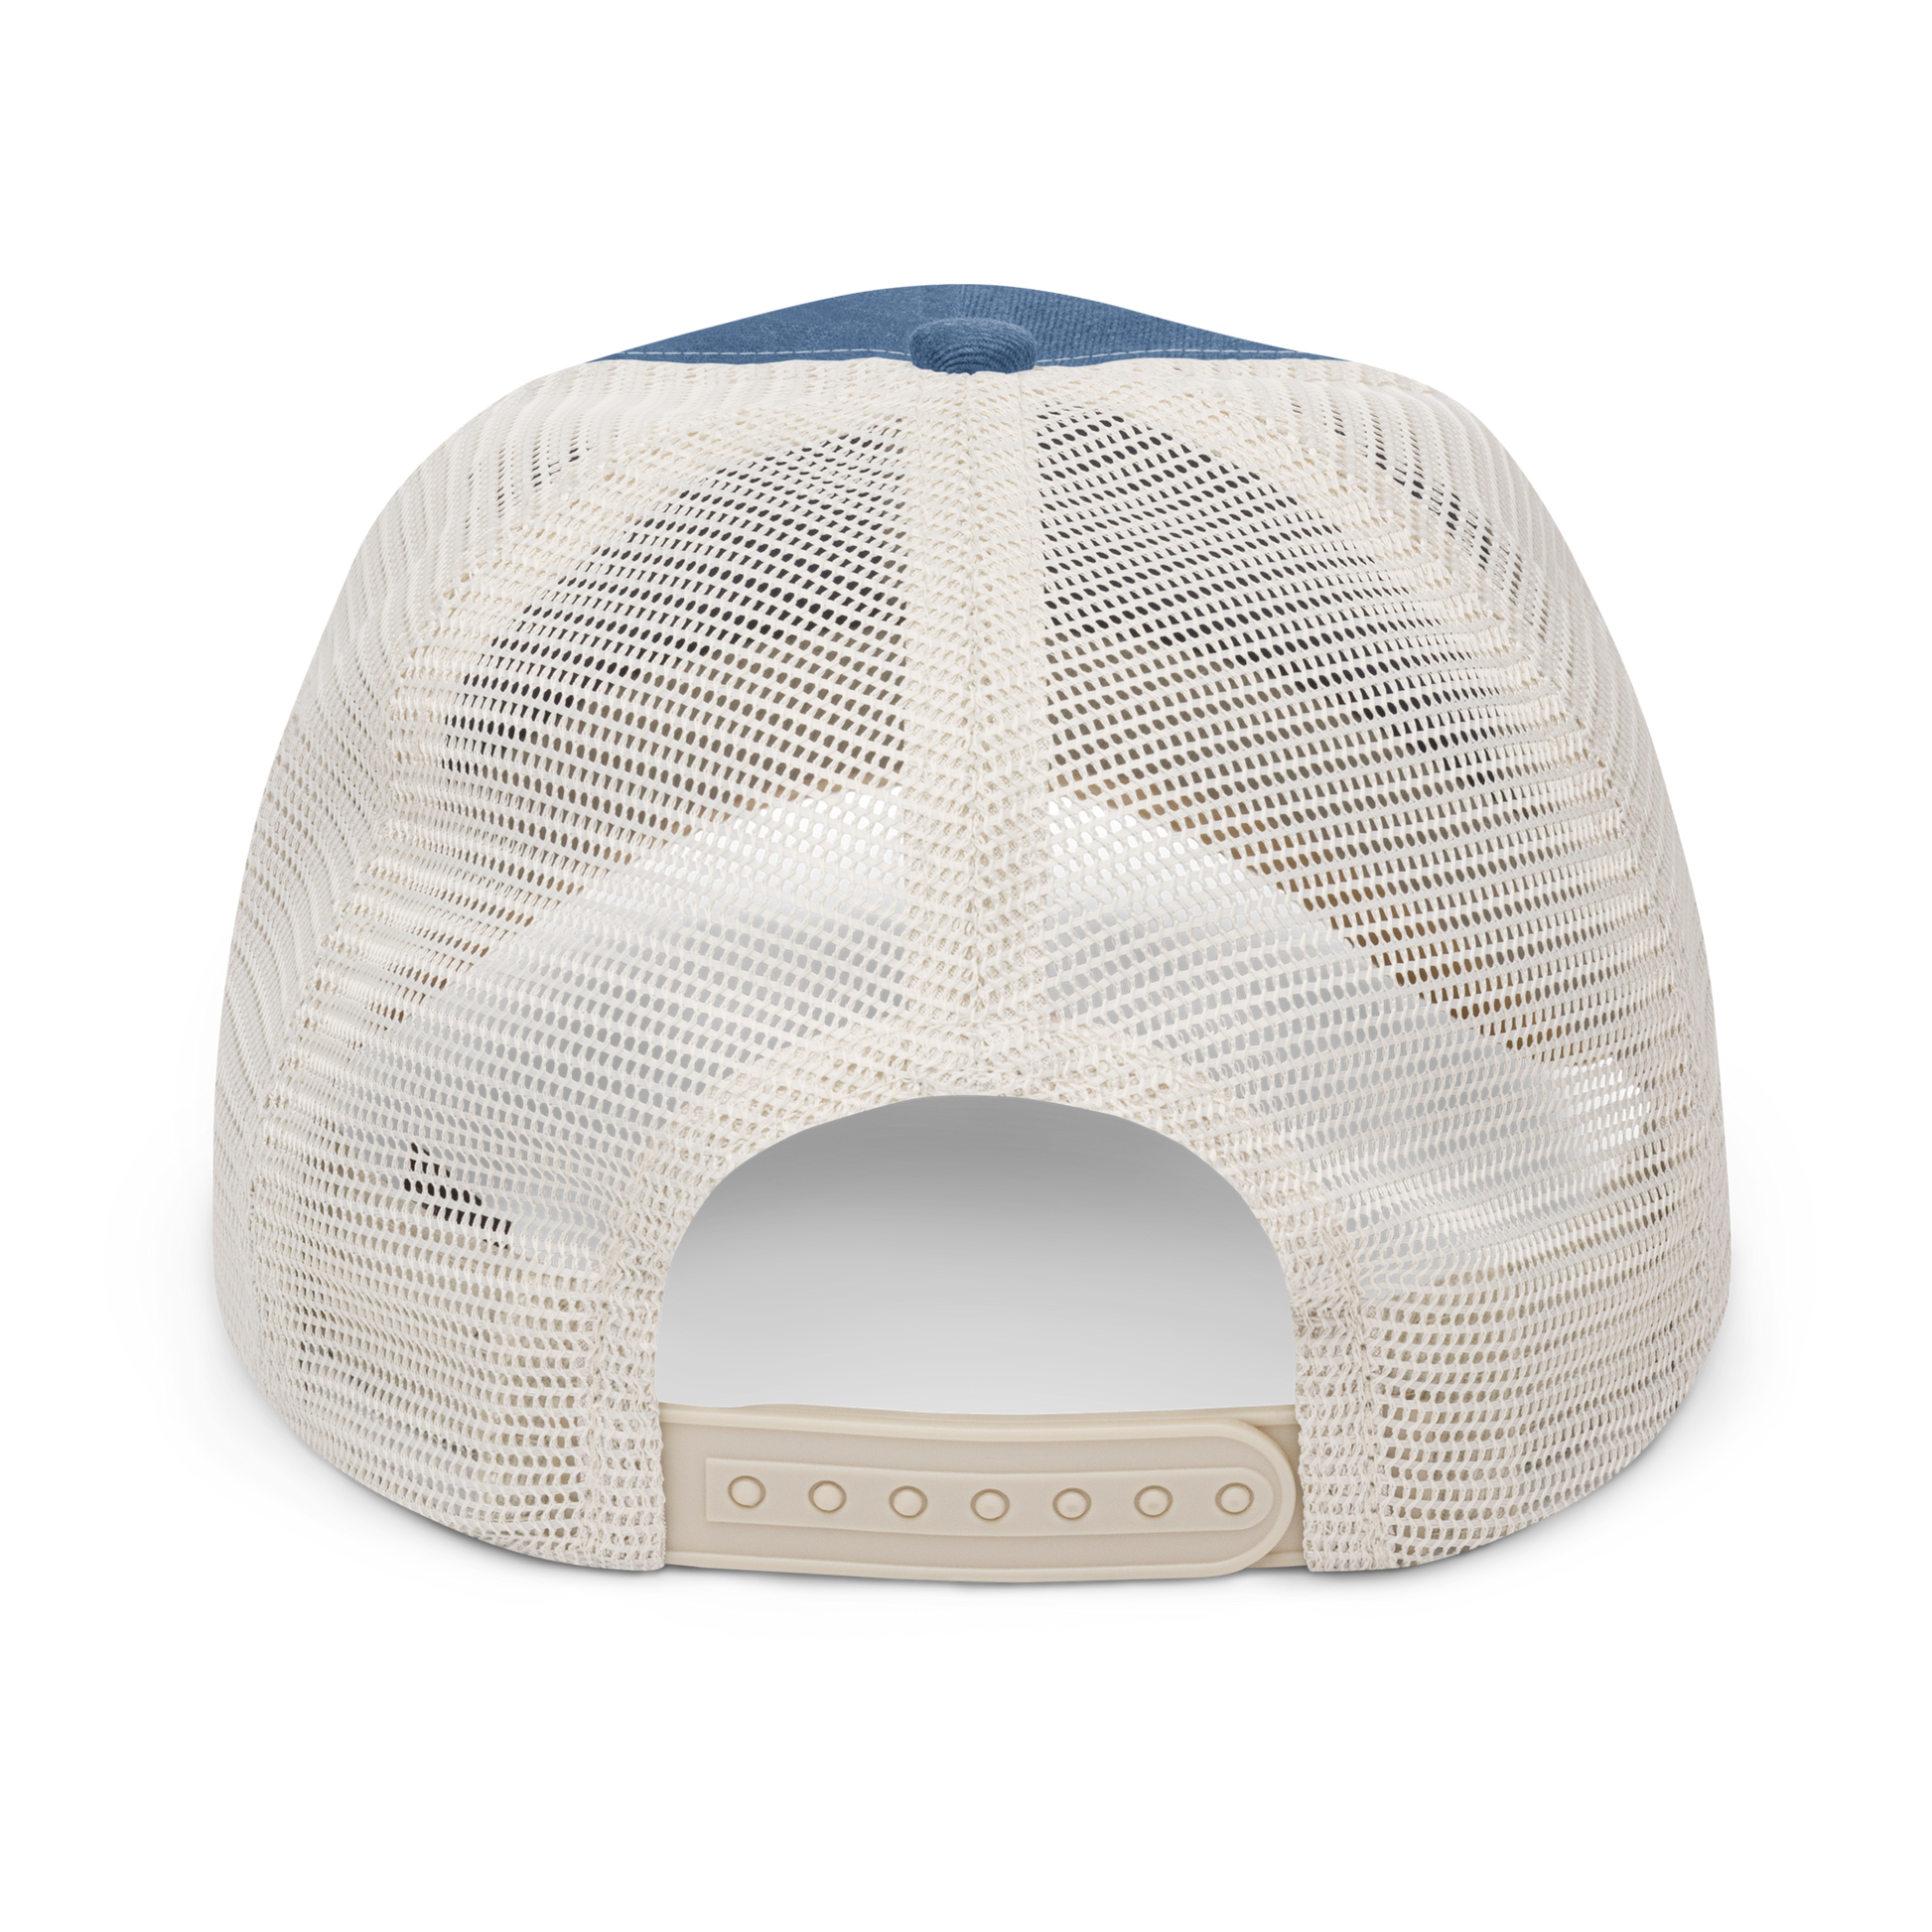 YHM Designs - YLW Kelowna Pigment-Dyed Trucker Cap - Crossed-X Design with Airport Code and Vintage Propliner - White Embroidery - Image 19